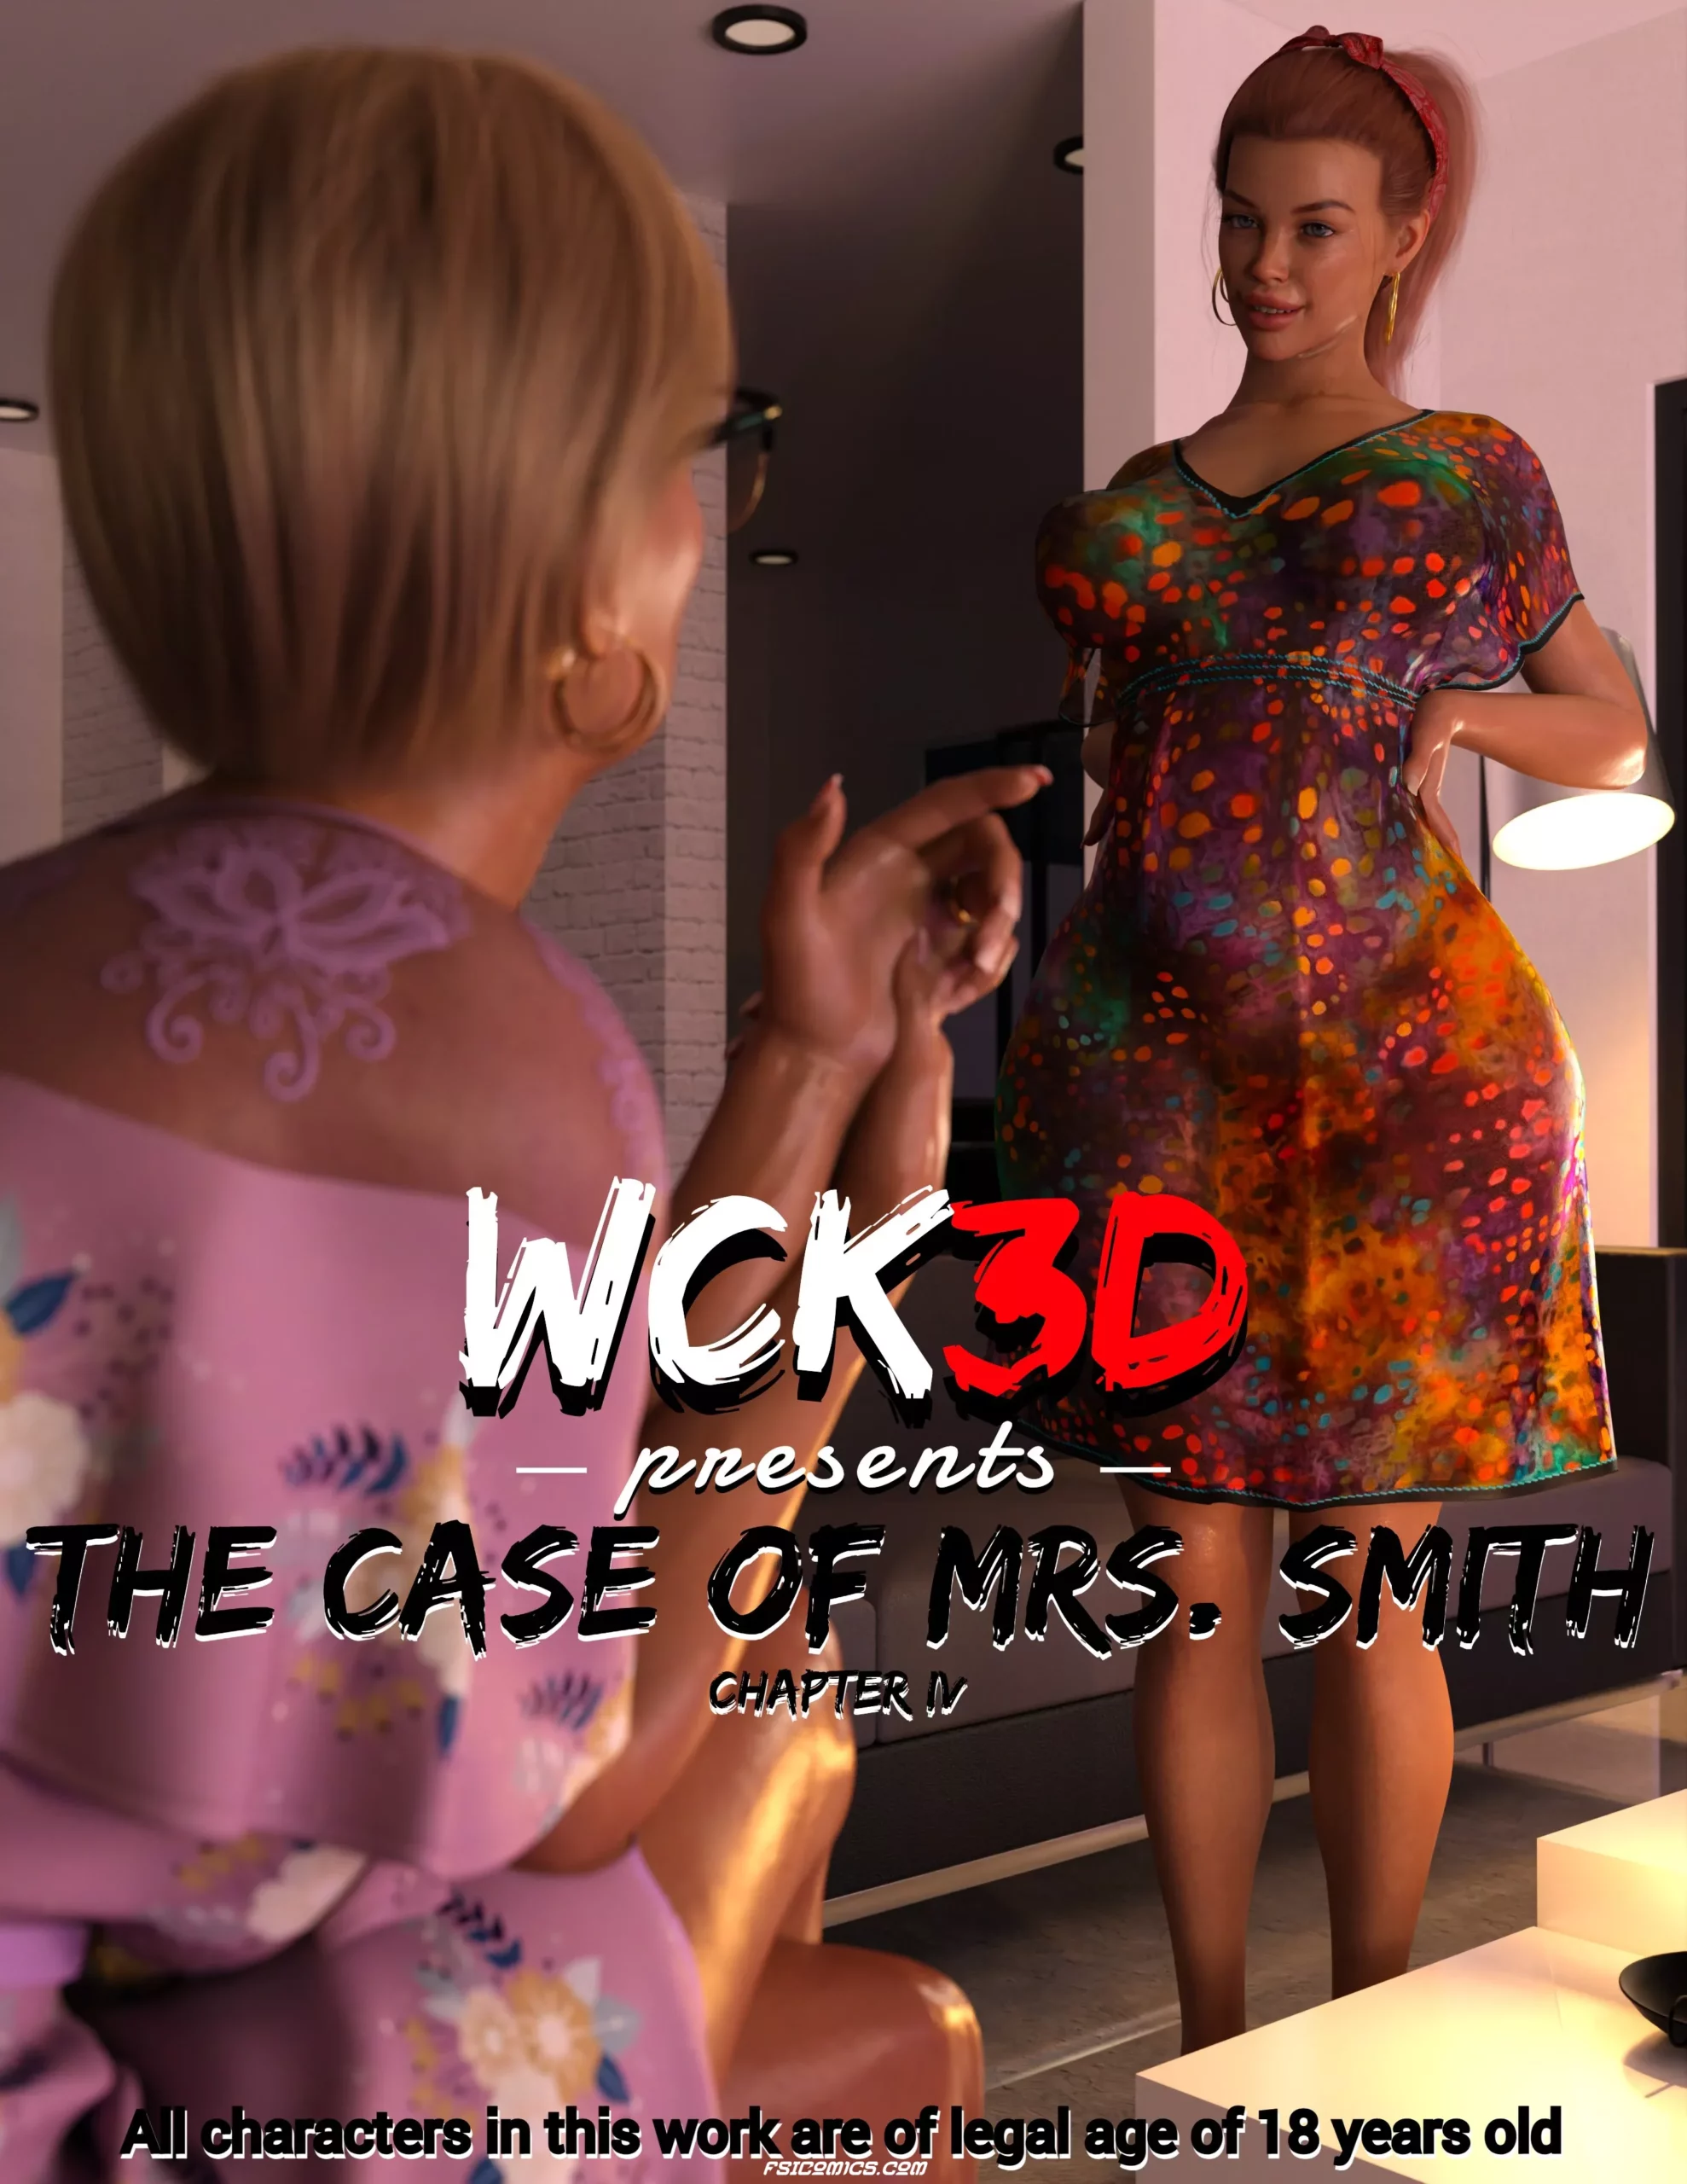 The Case Of Mrs Smith Chapter 4 - WCK3D - 7 - FSIComics